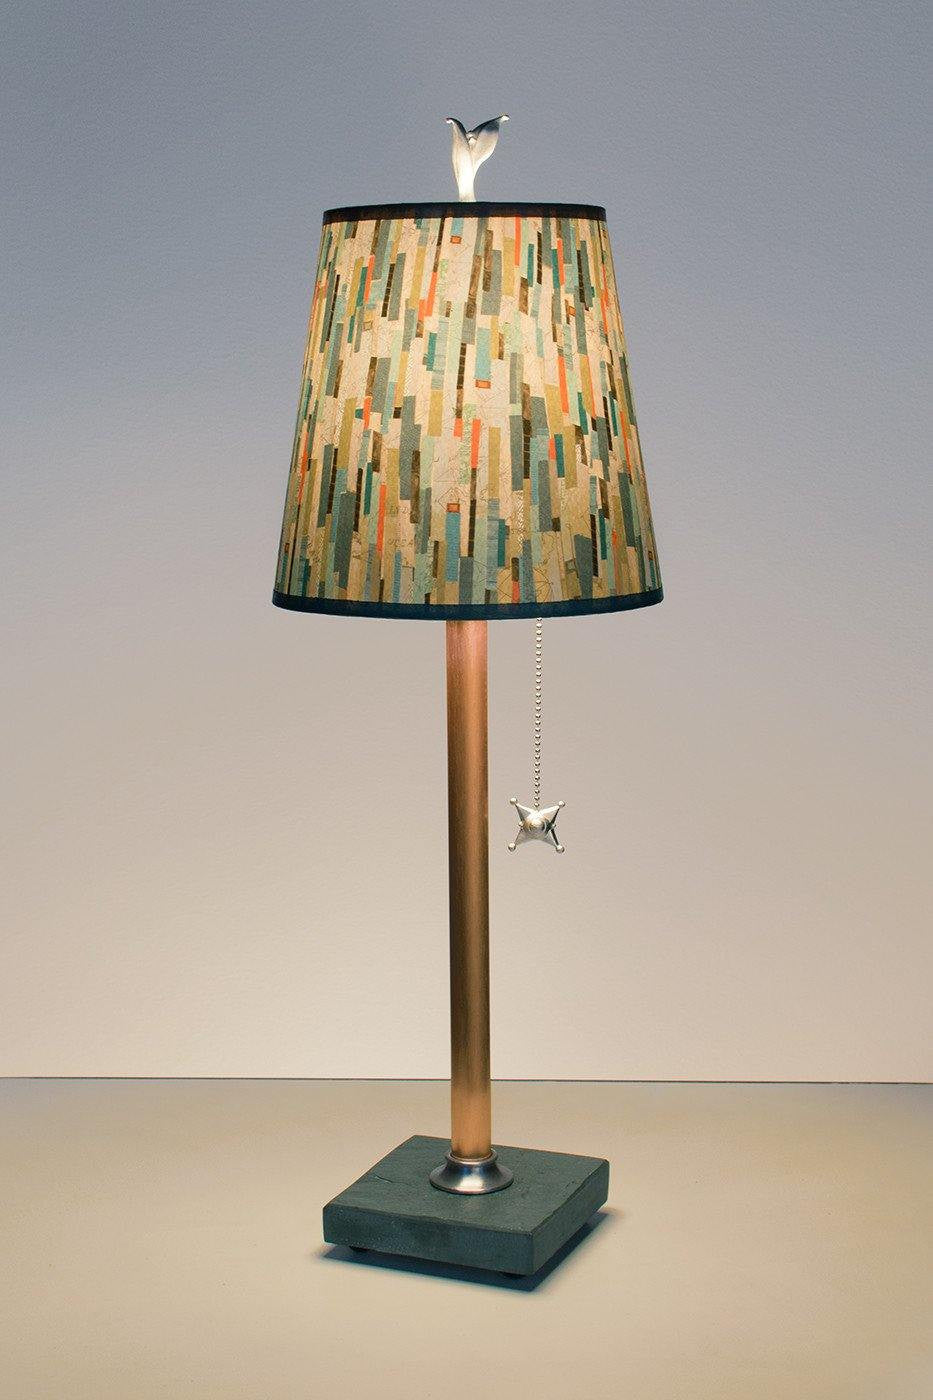 Janna Ugone & Co Table Lamps Copper Table Lamp with Small Drum Shade in Papers